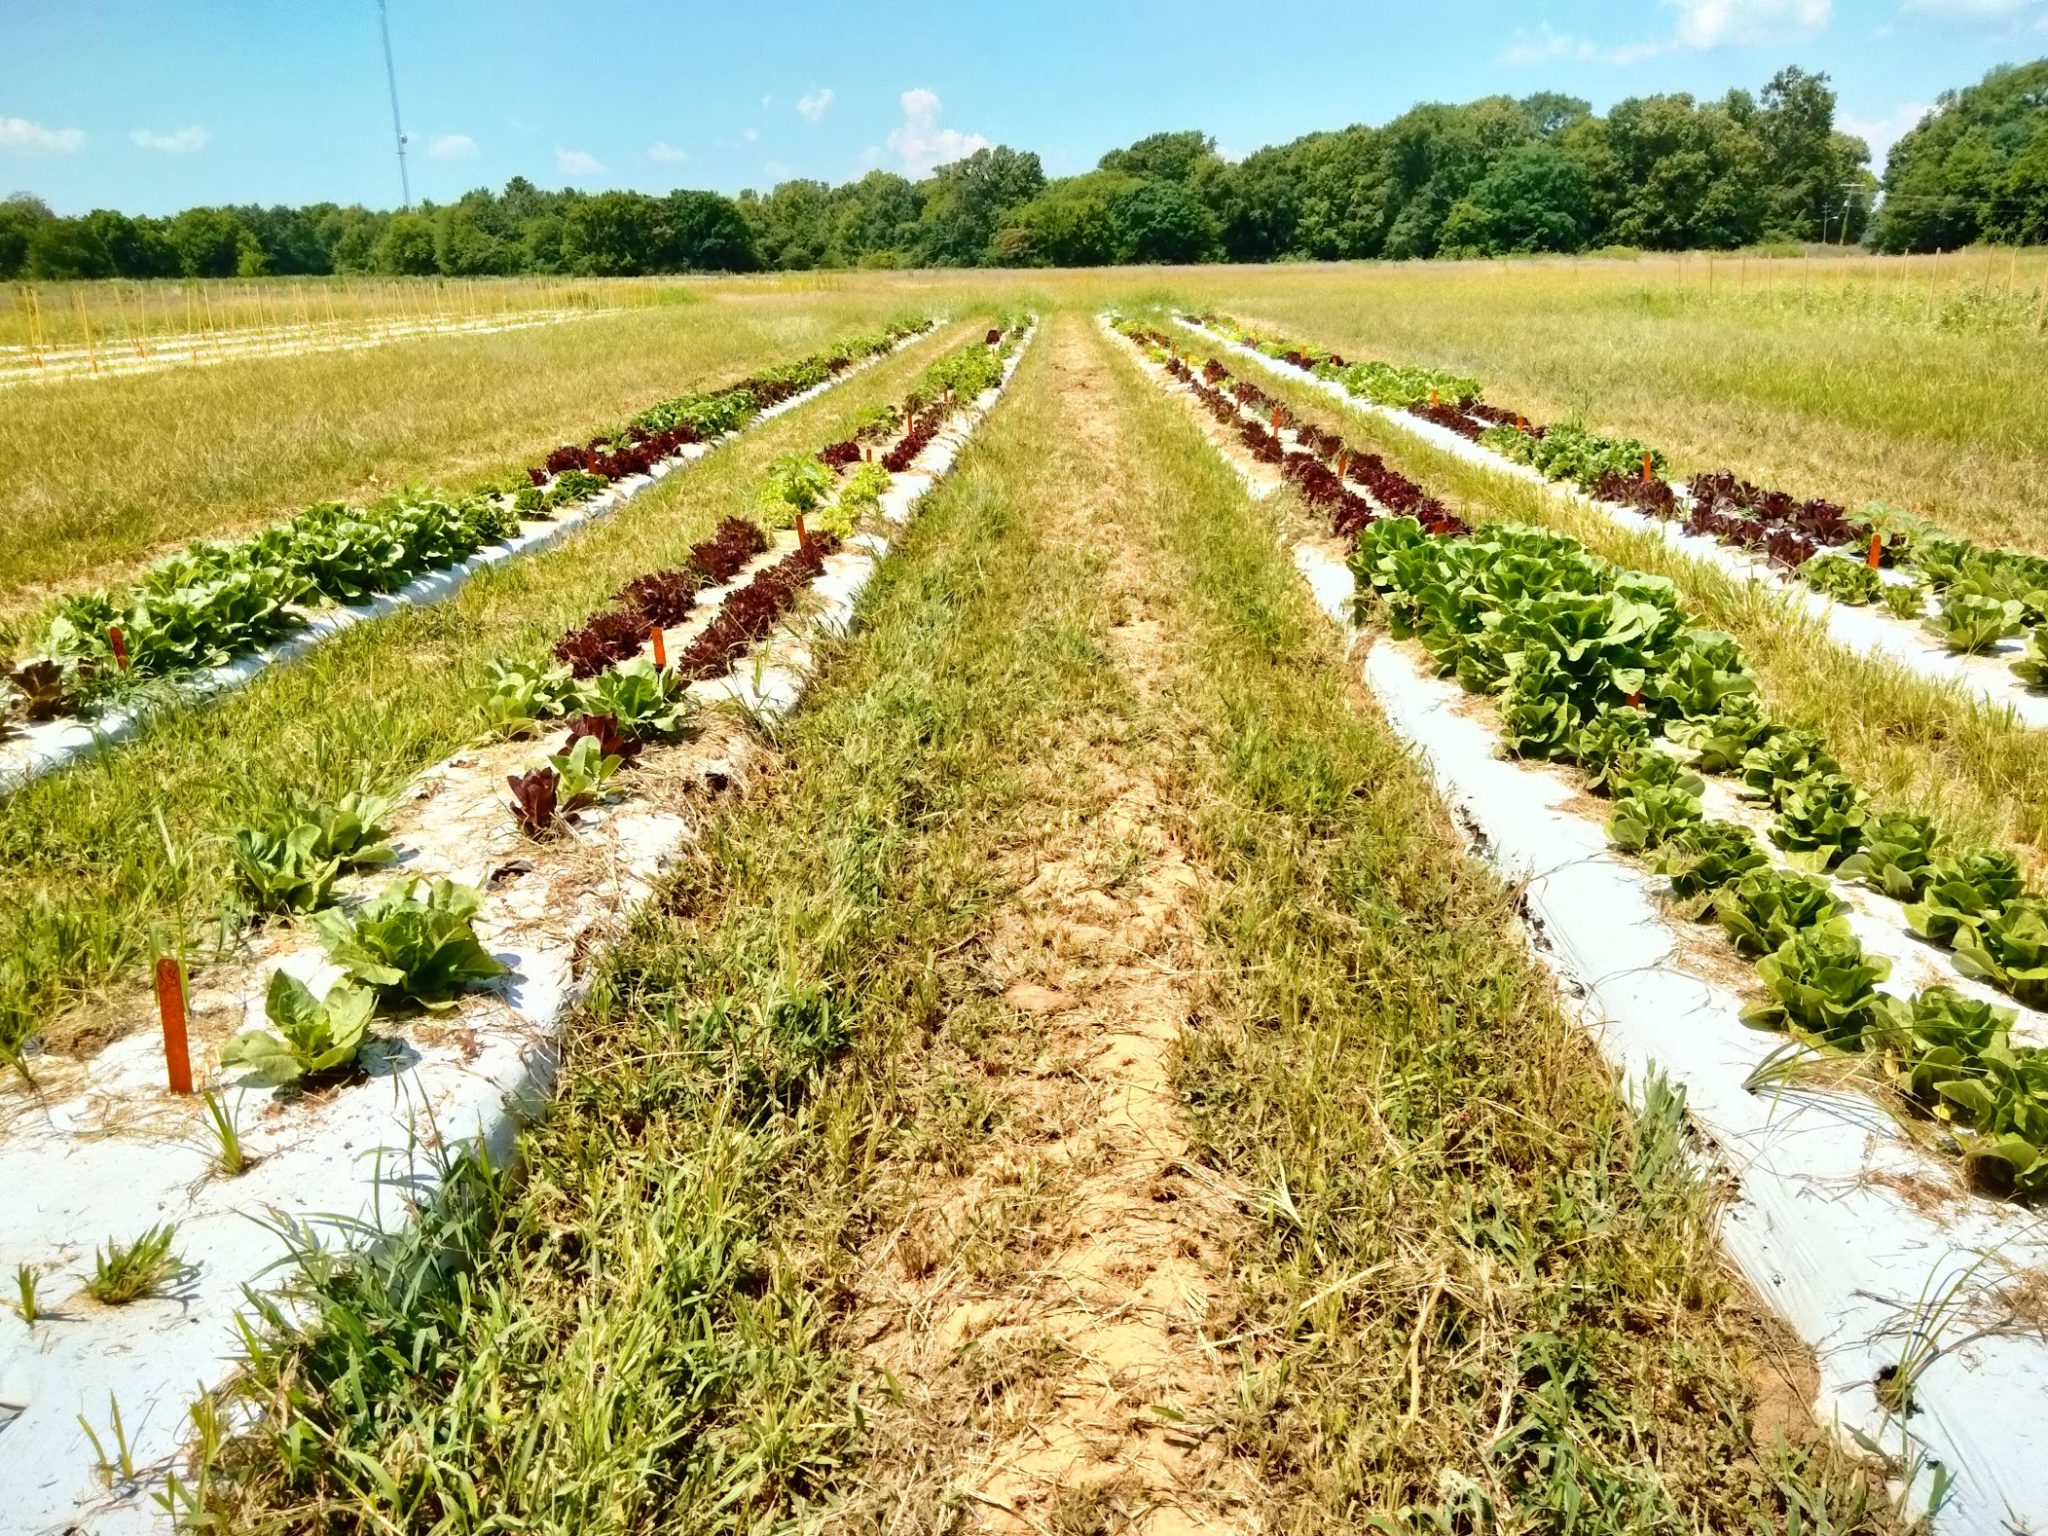 Figure 1. Overview of lettuce grown in an open field during spring 2022.